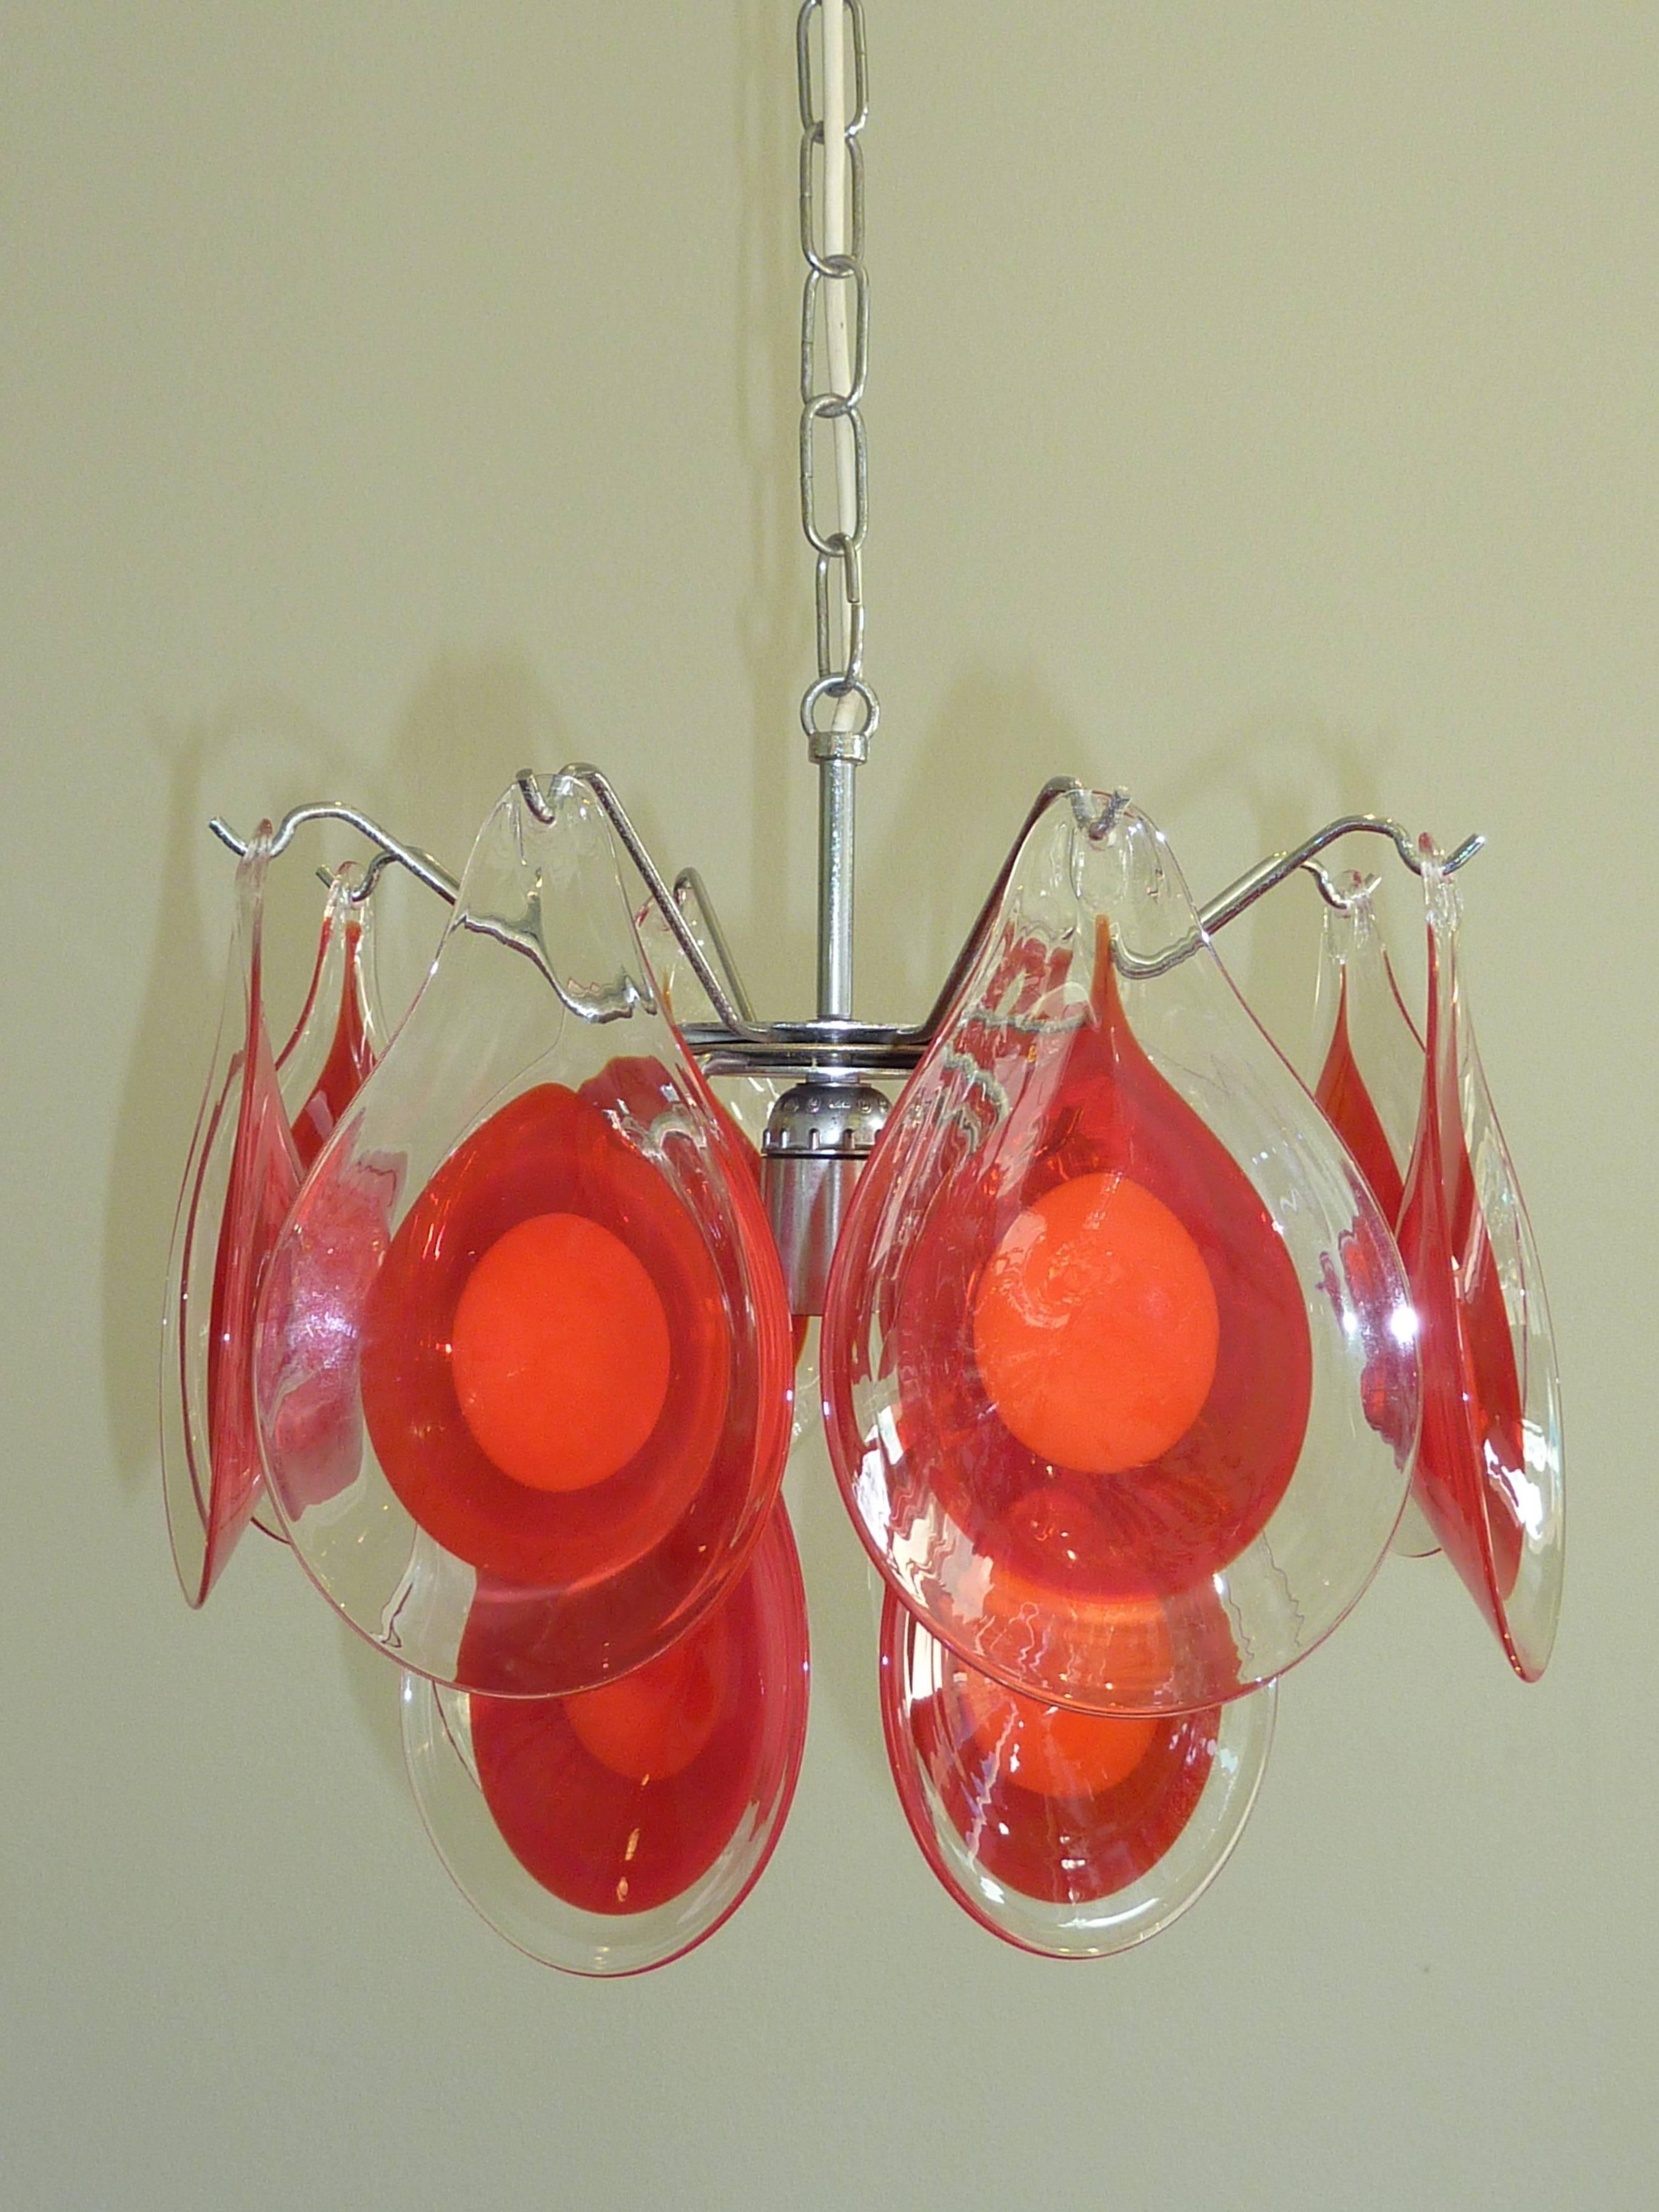 Beautiful and rare petit chandelier with 12 red and clear glass tear drop shaped art glasses. The fixture retains original European wiring. It requires E26 medium base light bulb. The chain with canopy is approximately 22 inches long. Priced to sell